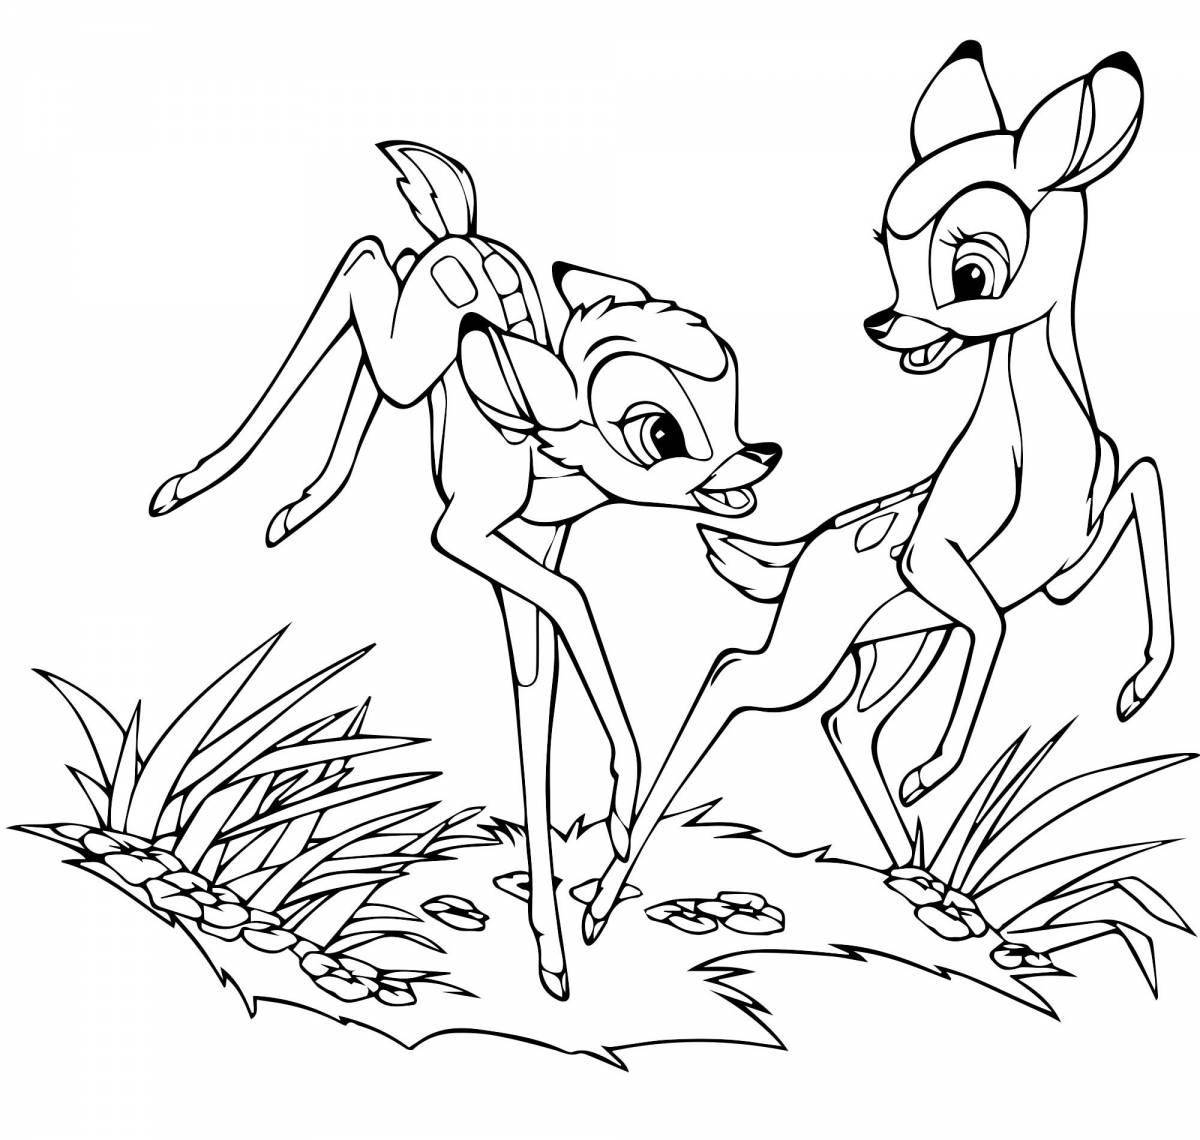 Outstanding bambi coloring book for 3-4 year olds